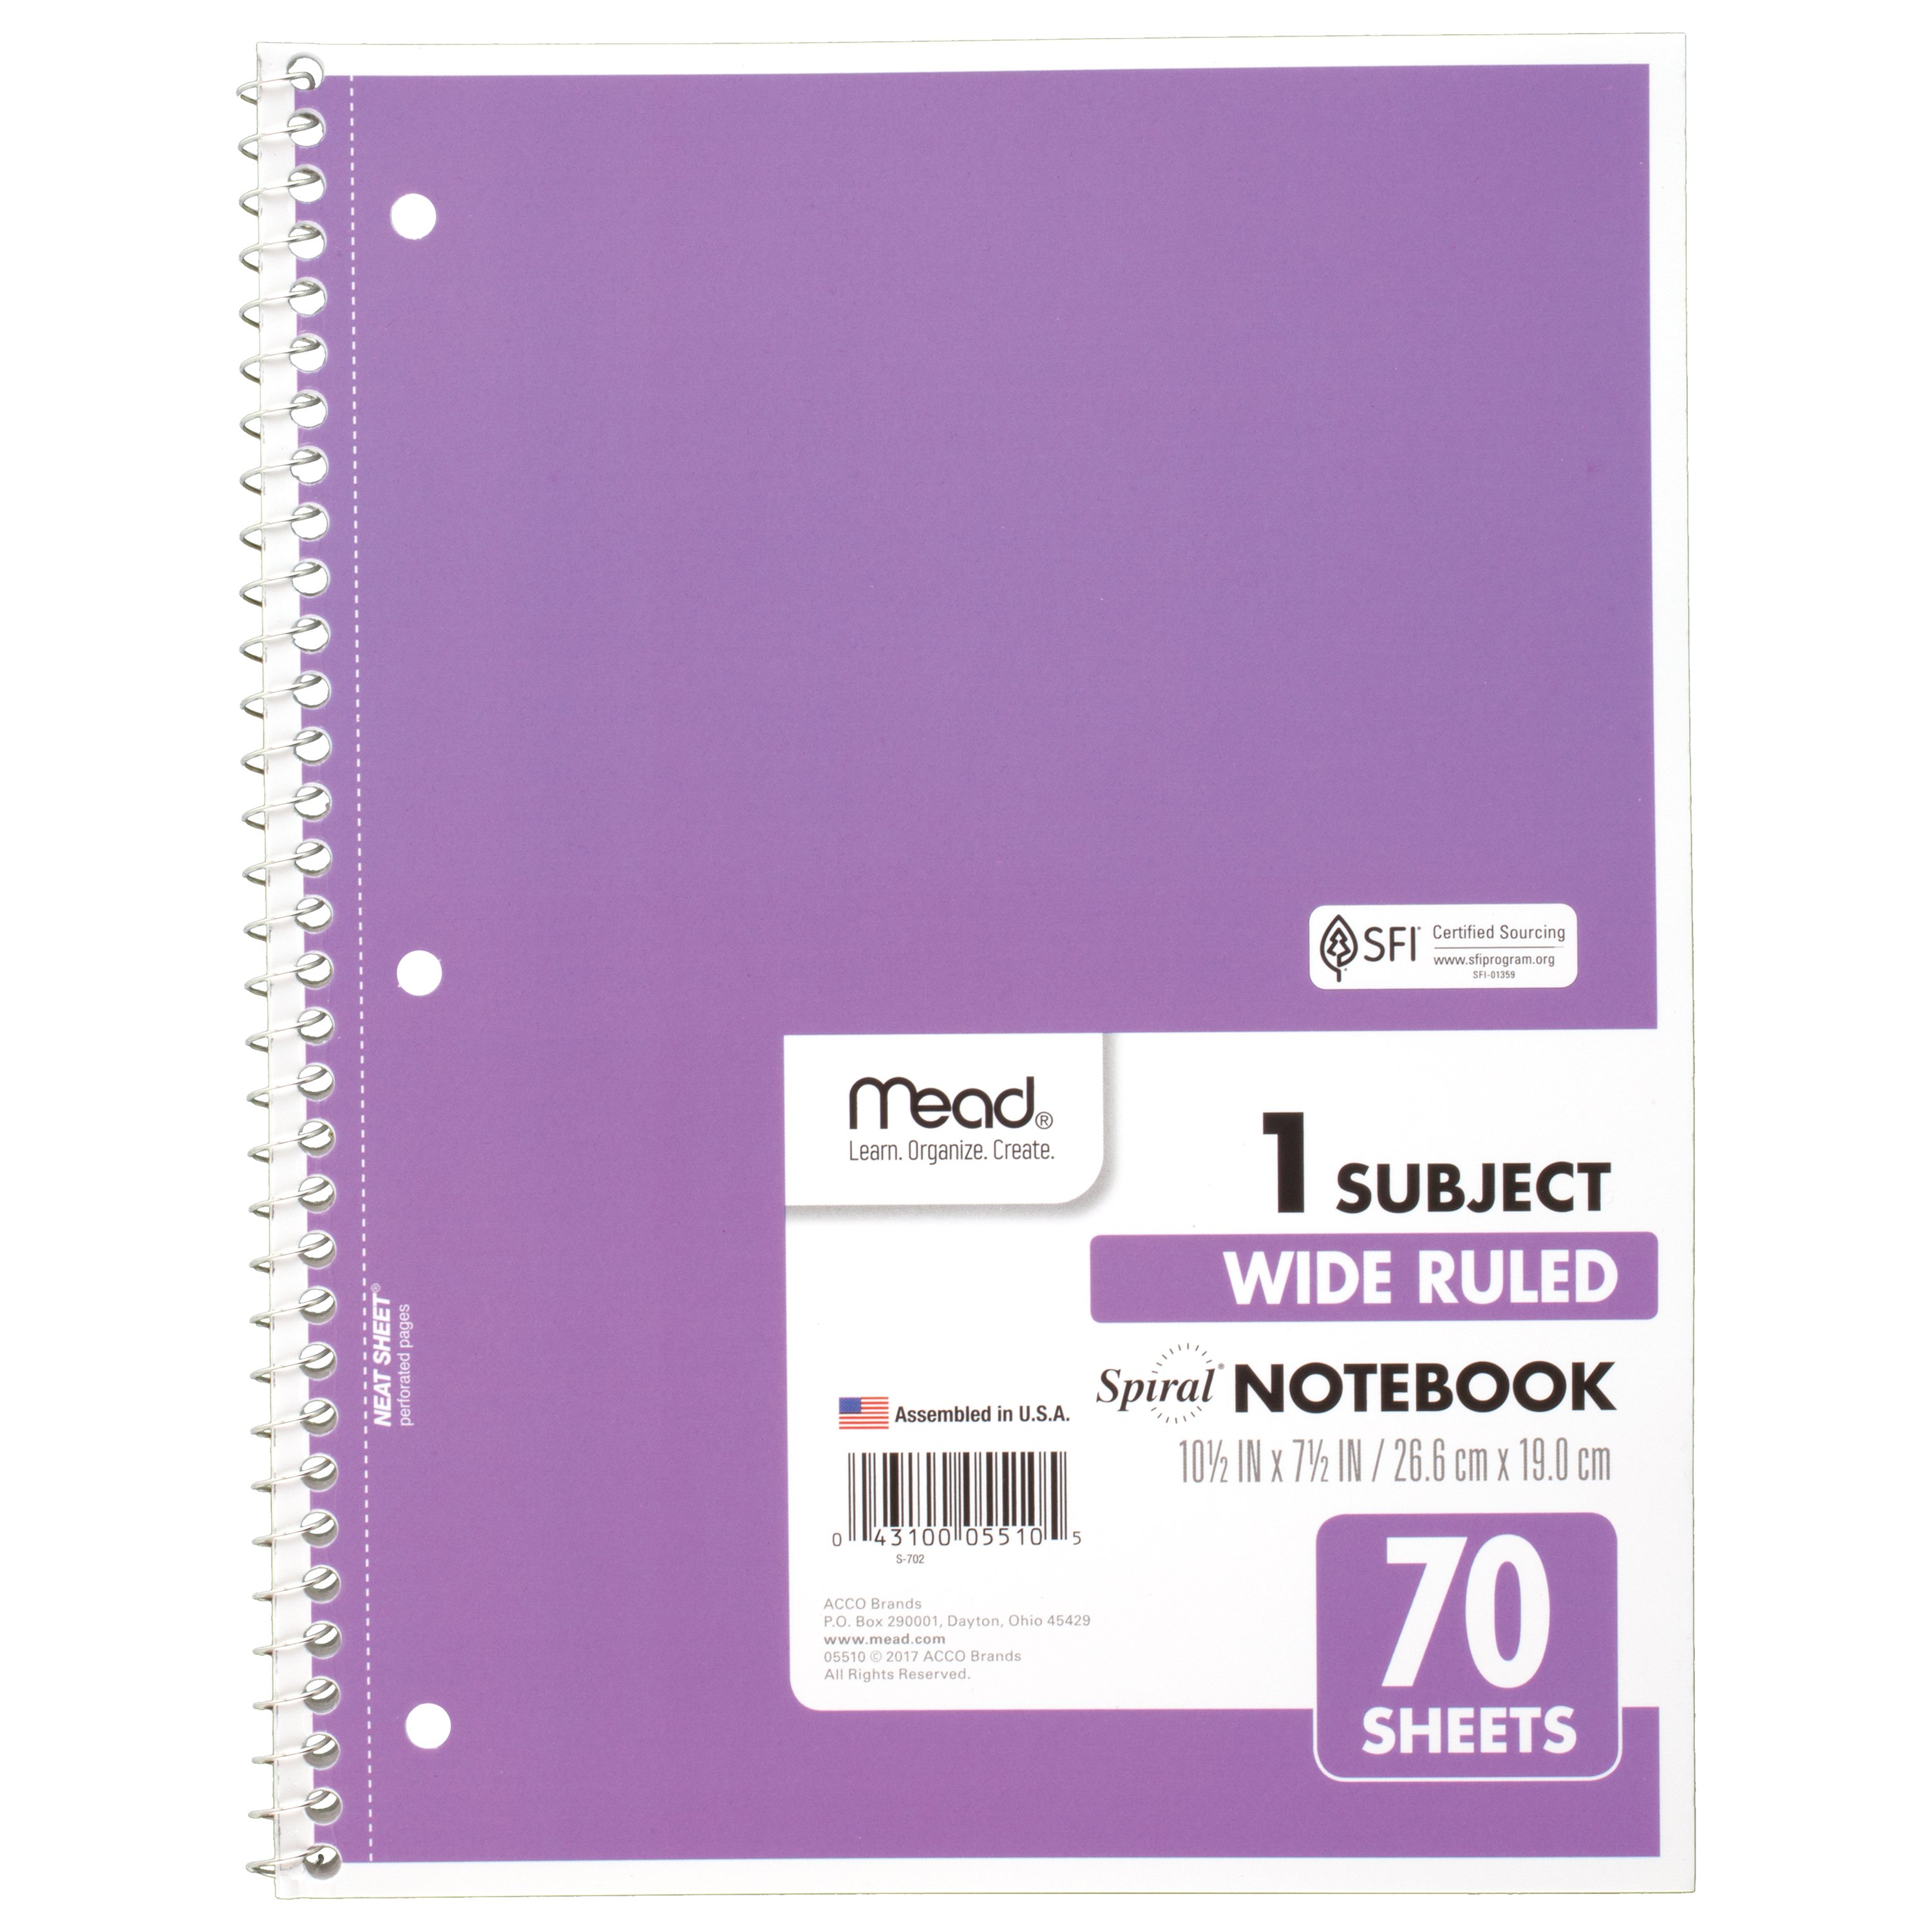 Mead Spiral 1 Subject Wide Ruled Notebook 6 Pack, Assorted Colors (73063) - image 5 of 8